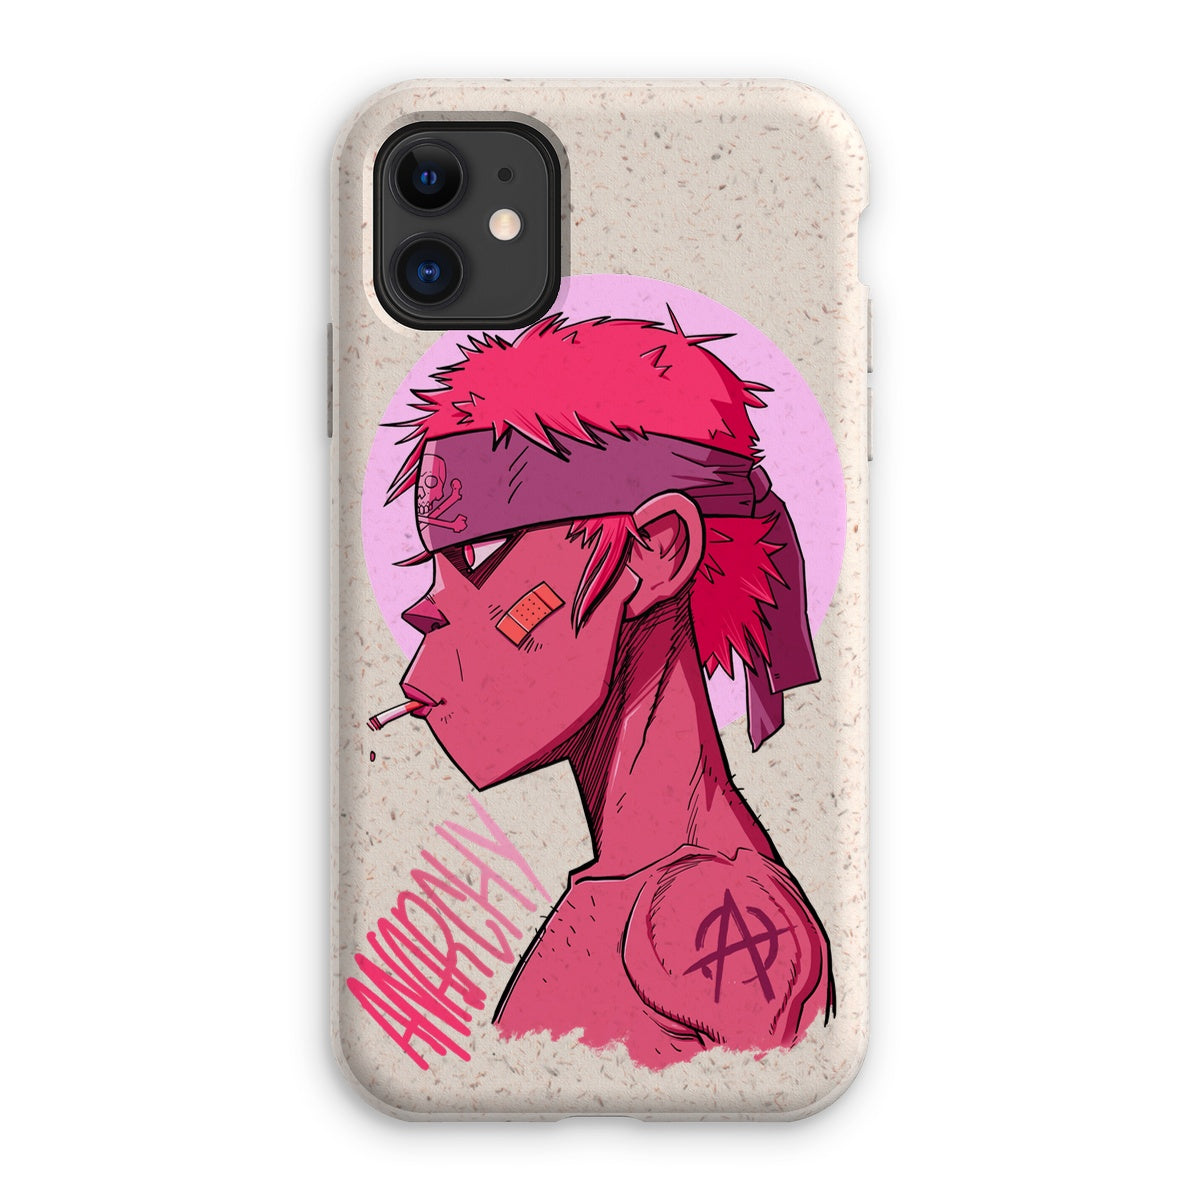 Unique and cool Gorillaz-style anarchy phone case illustration